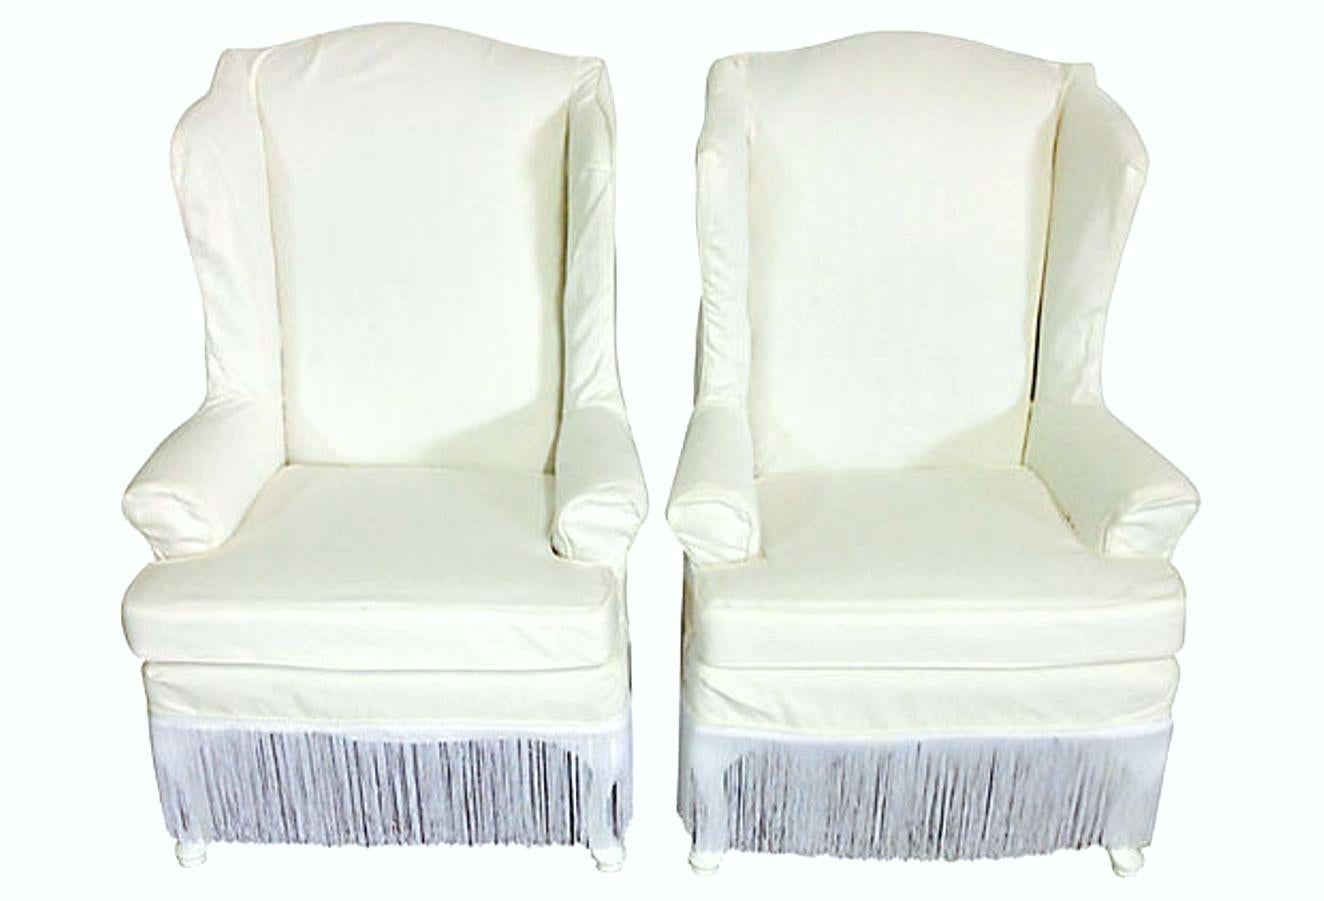 20th Century Pair Of American Queen Anne Style Wood Frame Upholstered Slip Cover Wing Back Arm Chairs. Features the original upholstery fabric in tact with newly made white denim and satin fringe detail slip covers. The mahogany legs are lacquered